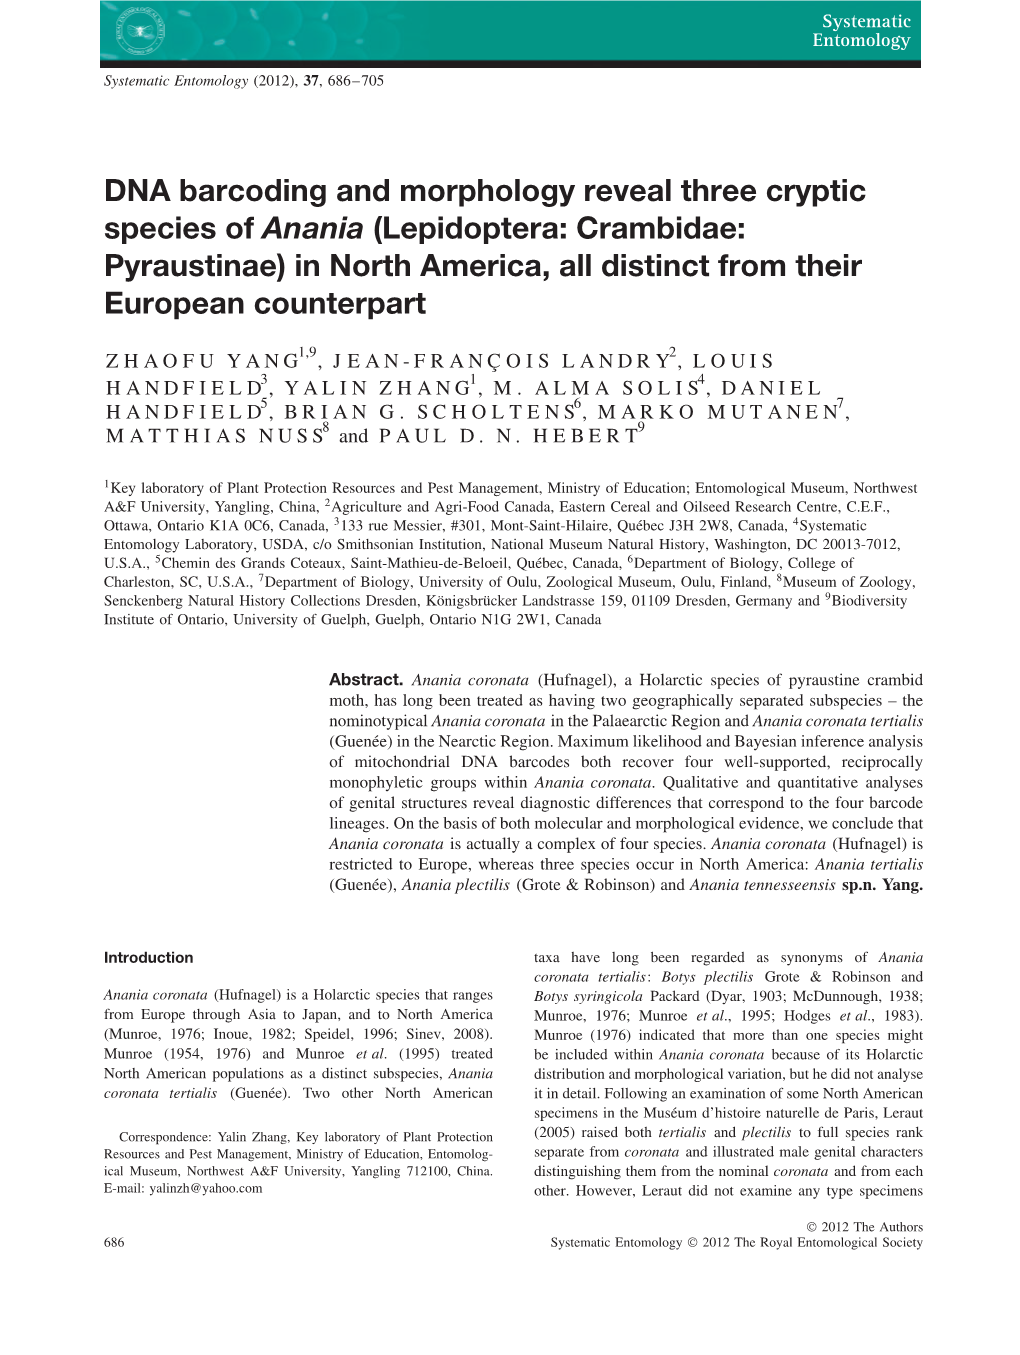 DNA Barcoding and Morphology Reveal Three Cryptic Species of Anania